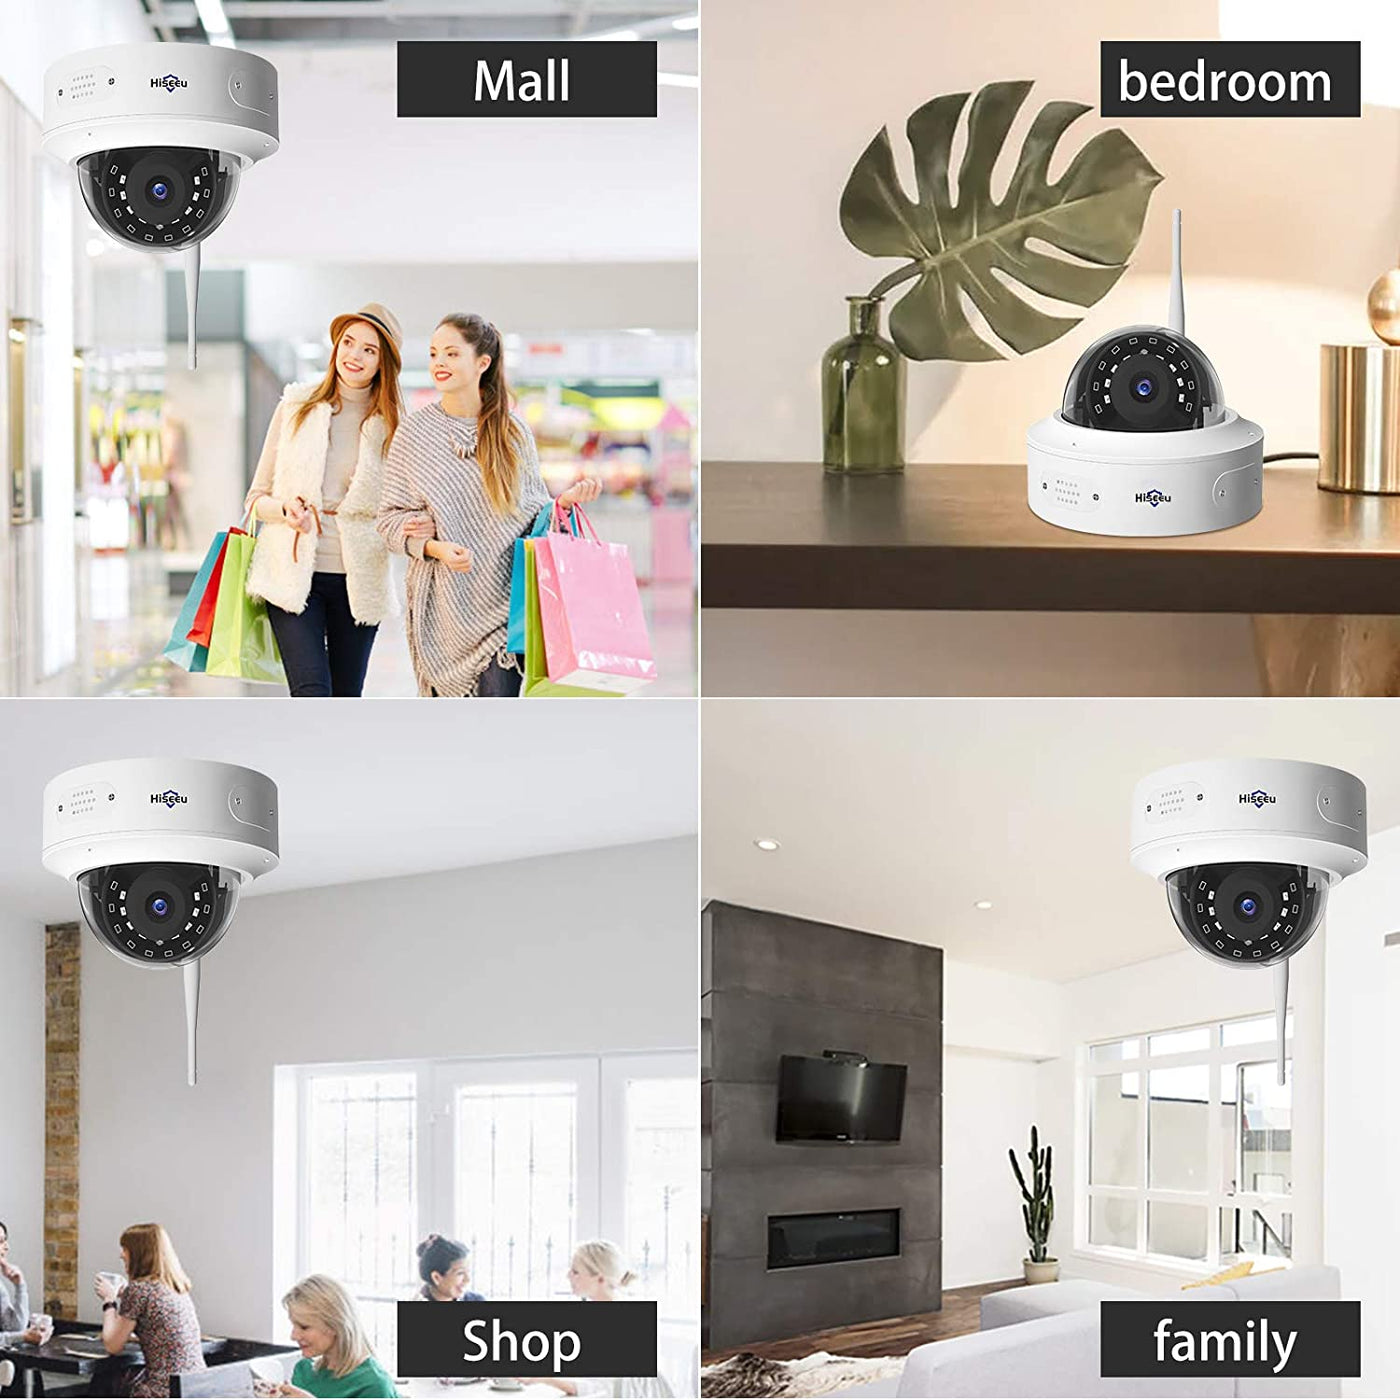 2K Security Camera Outdoor, Dome Surveillance IP Camera wit Two-Way Audio IP66 Waterproof, Motion Detection,Night Vision,Not PTZ Camera Compatible Wireless Camera System